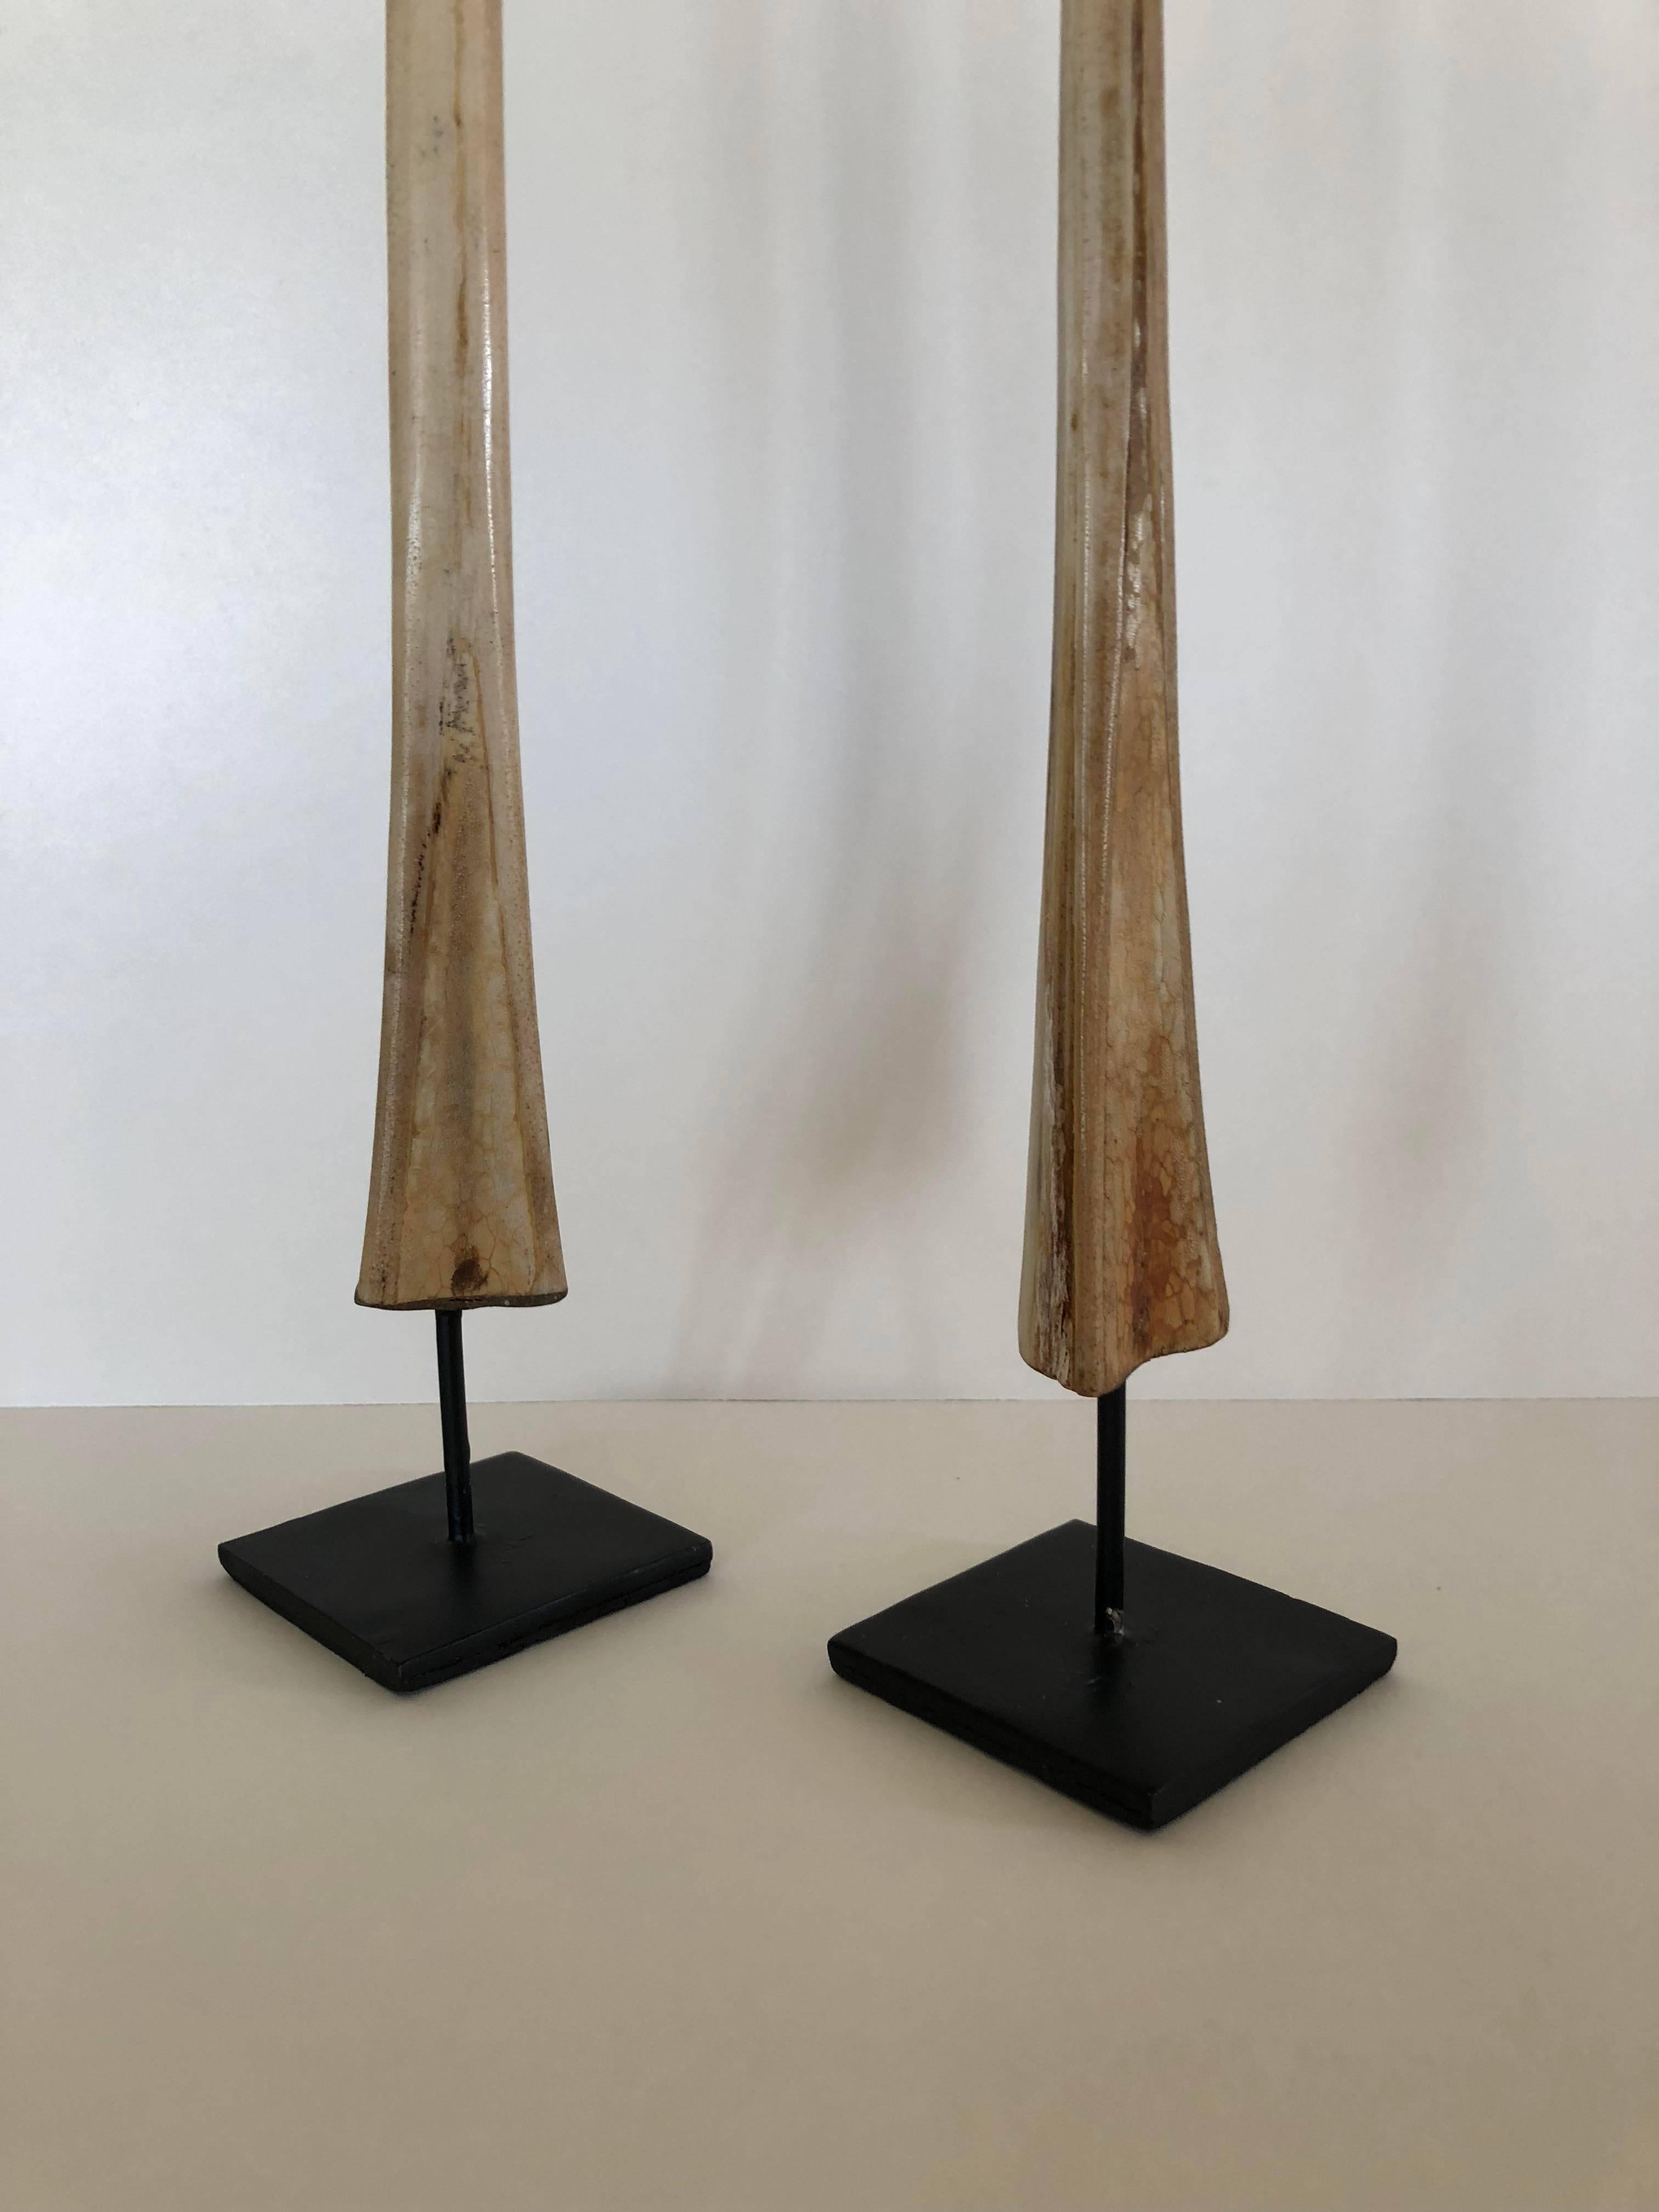 Pair of marlin (fish) bills mounted on stands.